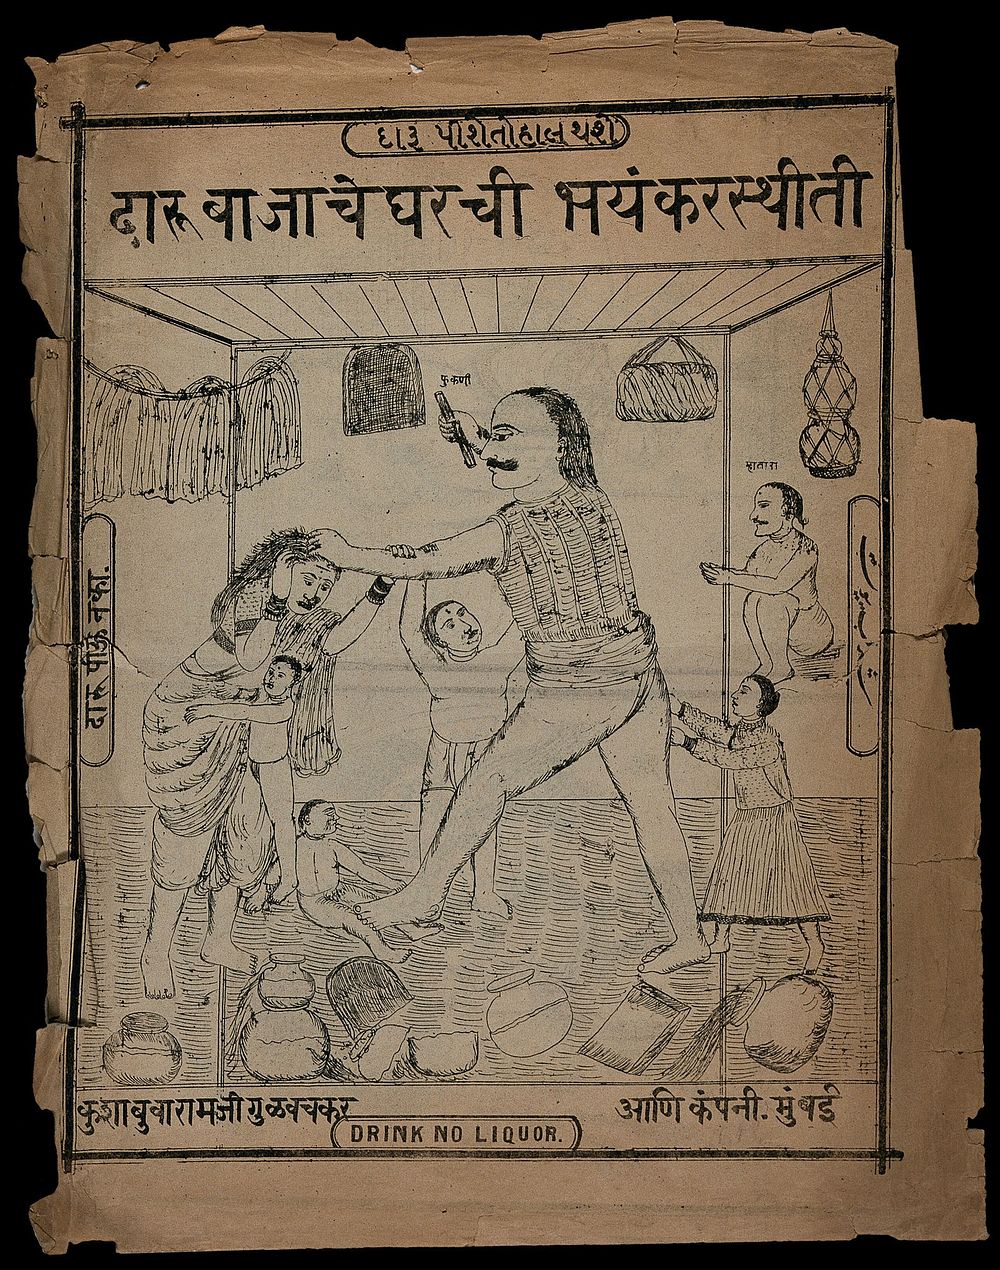 A drunken man beating his wife while the children try to stop him; a warning against the effects of alcohol. Lithograph.